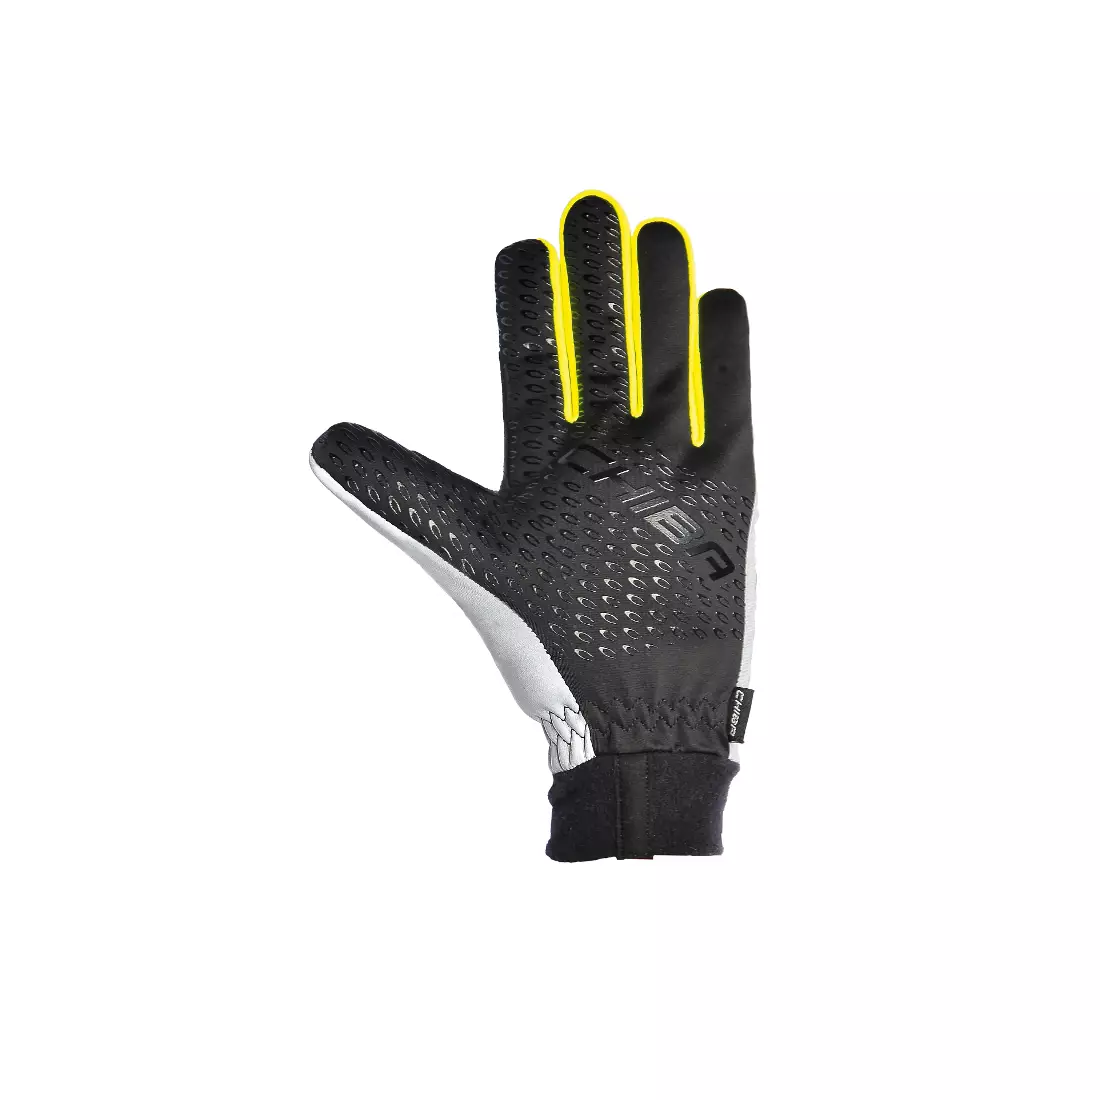 CHIBA PRO SAFETY insulated gloves, reflective 31515